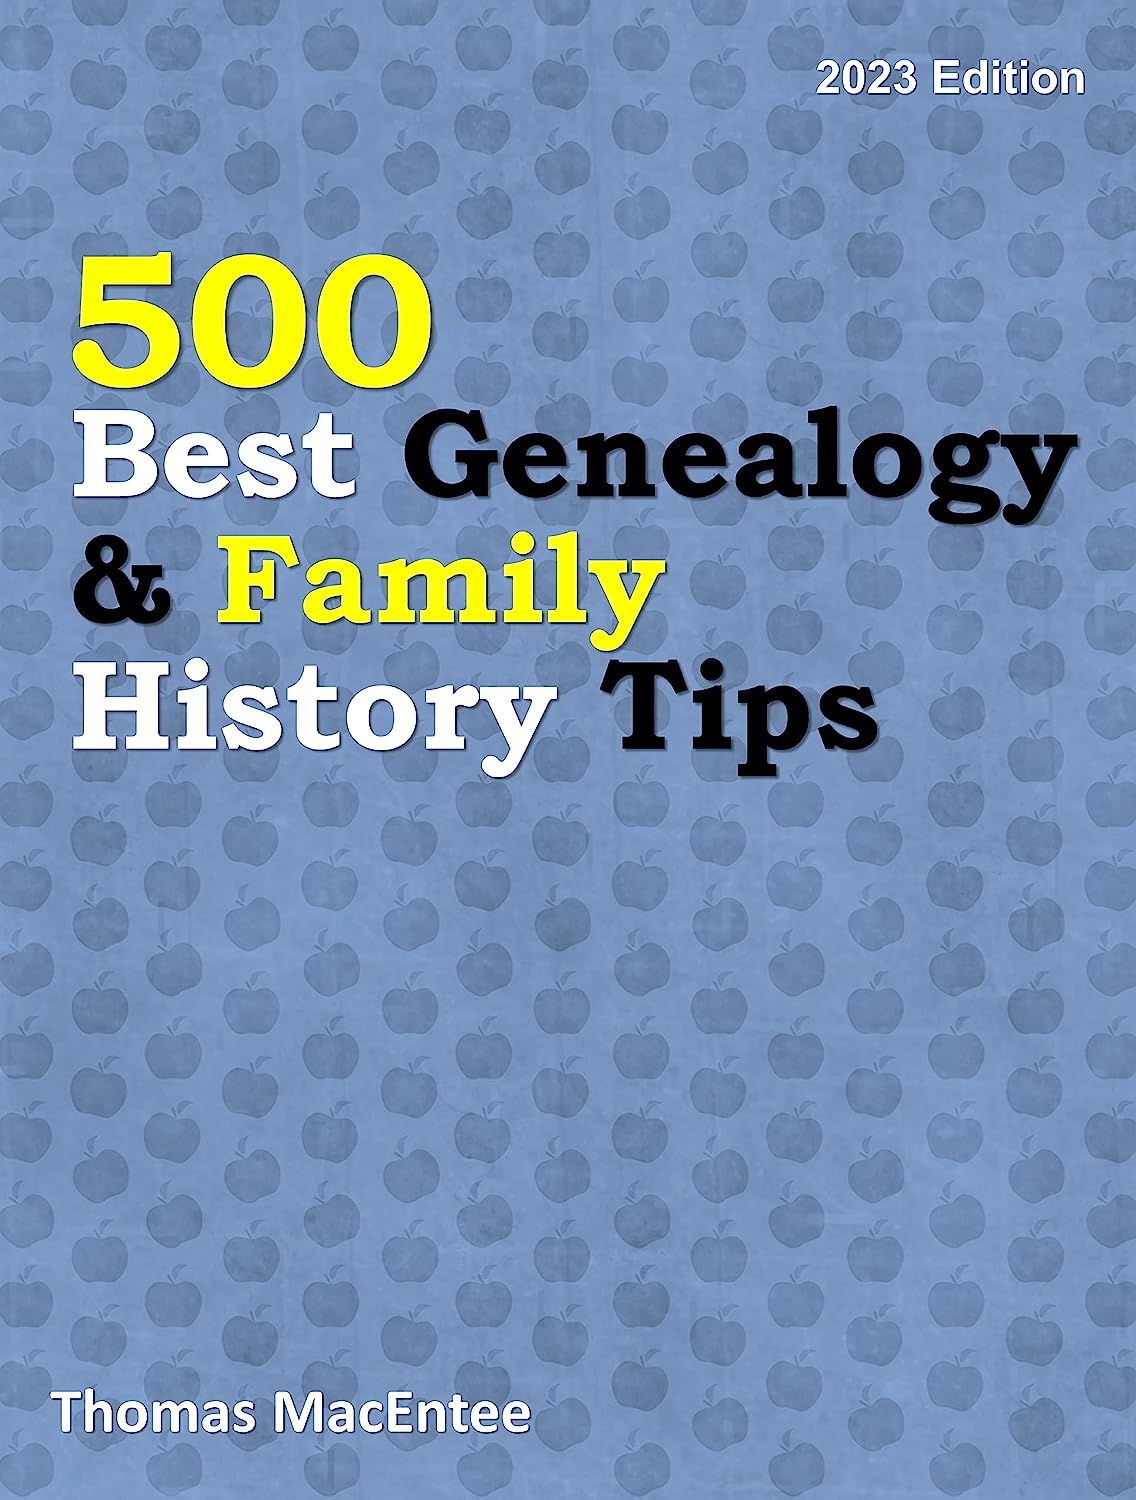 Genealogy expert Thomas MacEntee has just updated his best-selling book 500 Best Genealogy and Family History Tips for 2023. The book is now available in three convenient formats: Amazon Kindle, PDF, and Paperback!